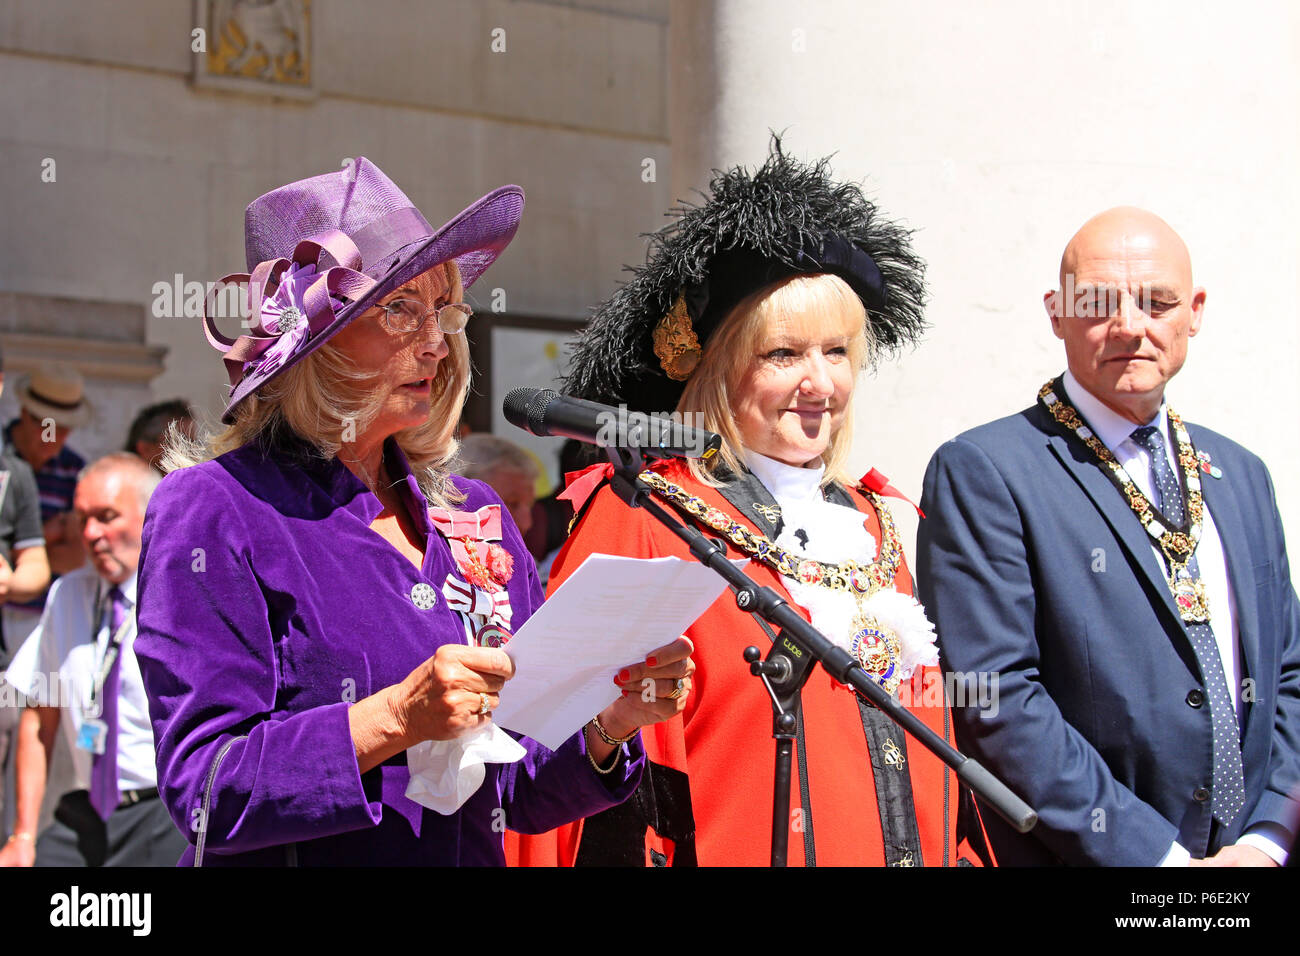 Manchester, UK, 30 June 2018. The Lord Mayor and dignitaries during celebrations of Armed Forces Day where the public are given the opportunity to meet members of the armed forces and talk to them about the work they do, St Peters Square, Manchester, 30th June, 2018 (C)Barbara Cook/Alamy Live News Stock Photo